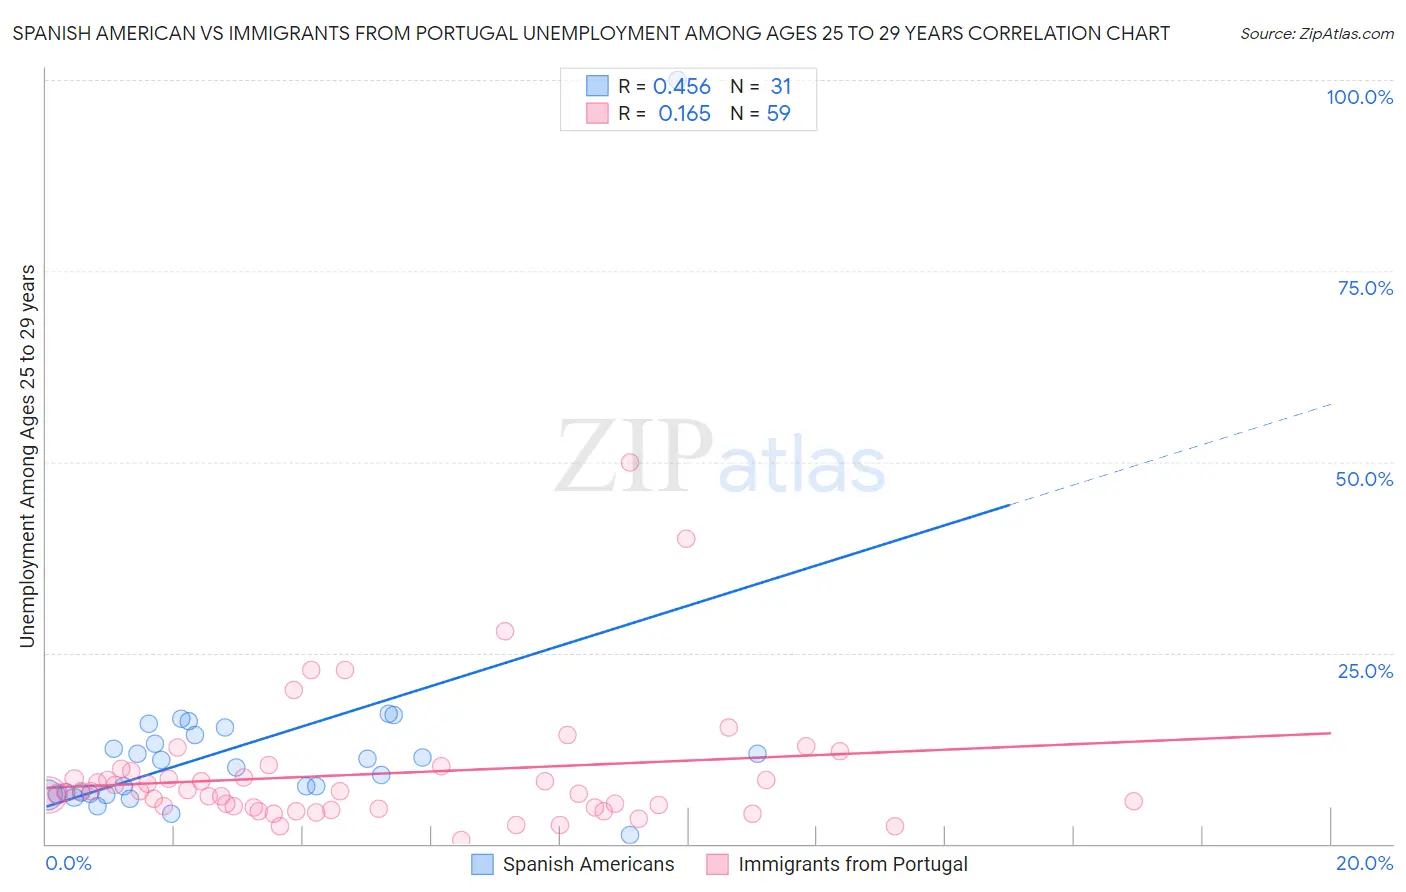 Spanish American vs Immigrants from Portugal Unemployment Among Ages 25 to 29 years